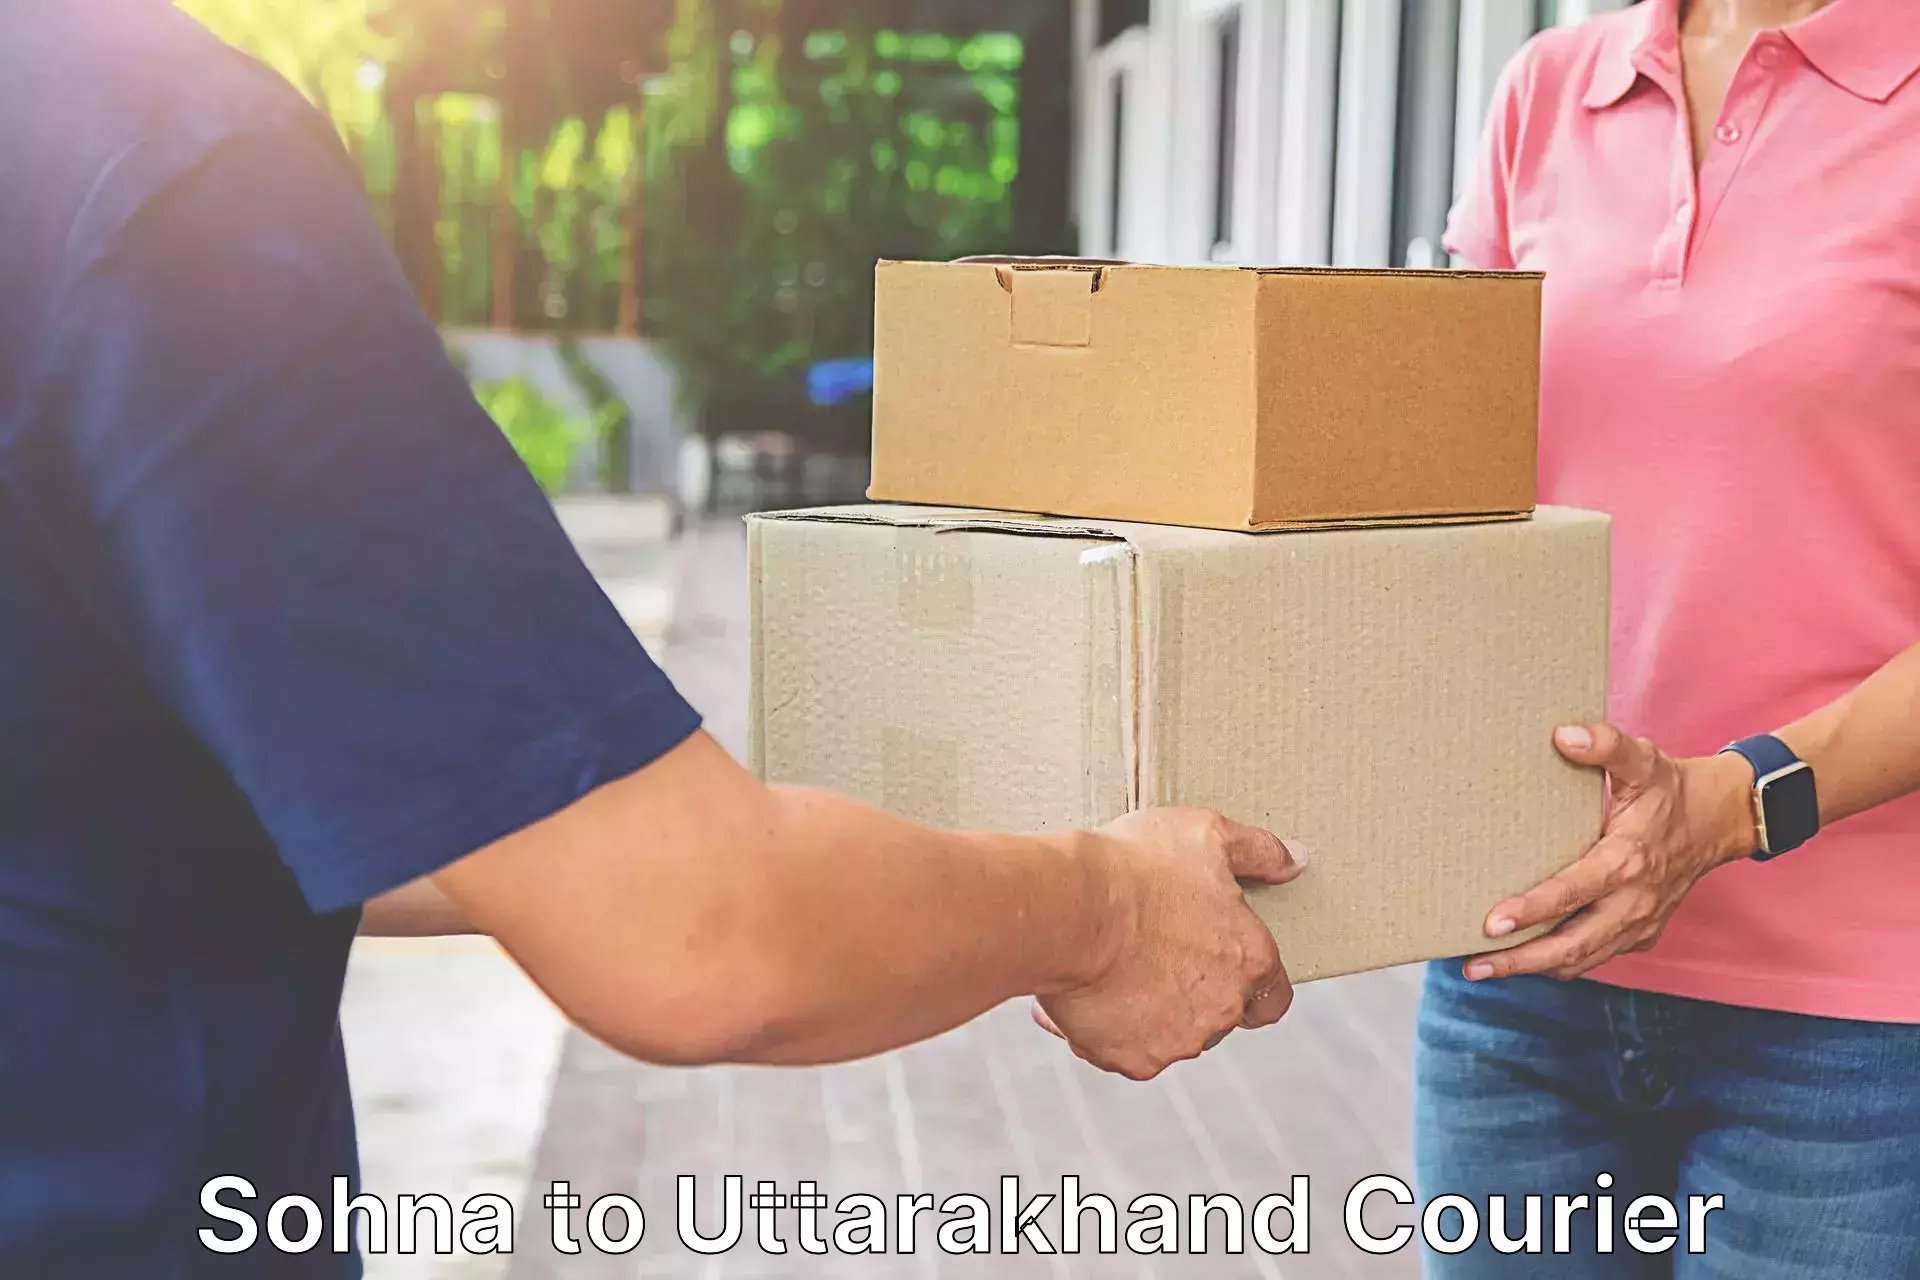 User-friendly delivery service Sohna to Rishikesh